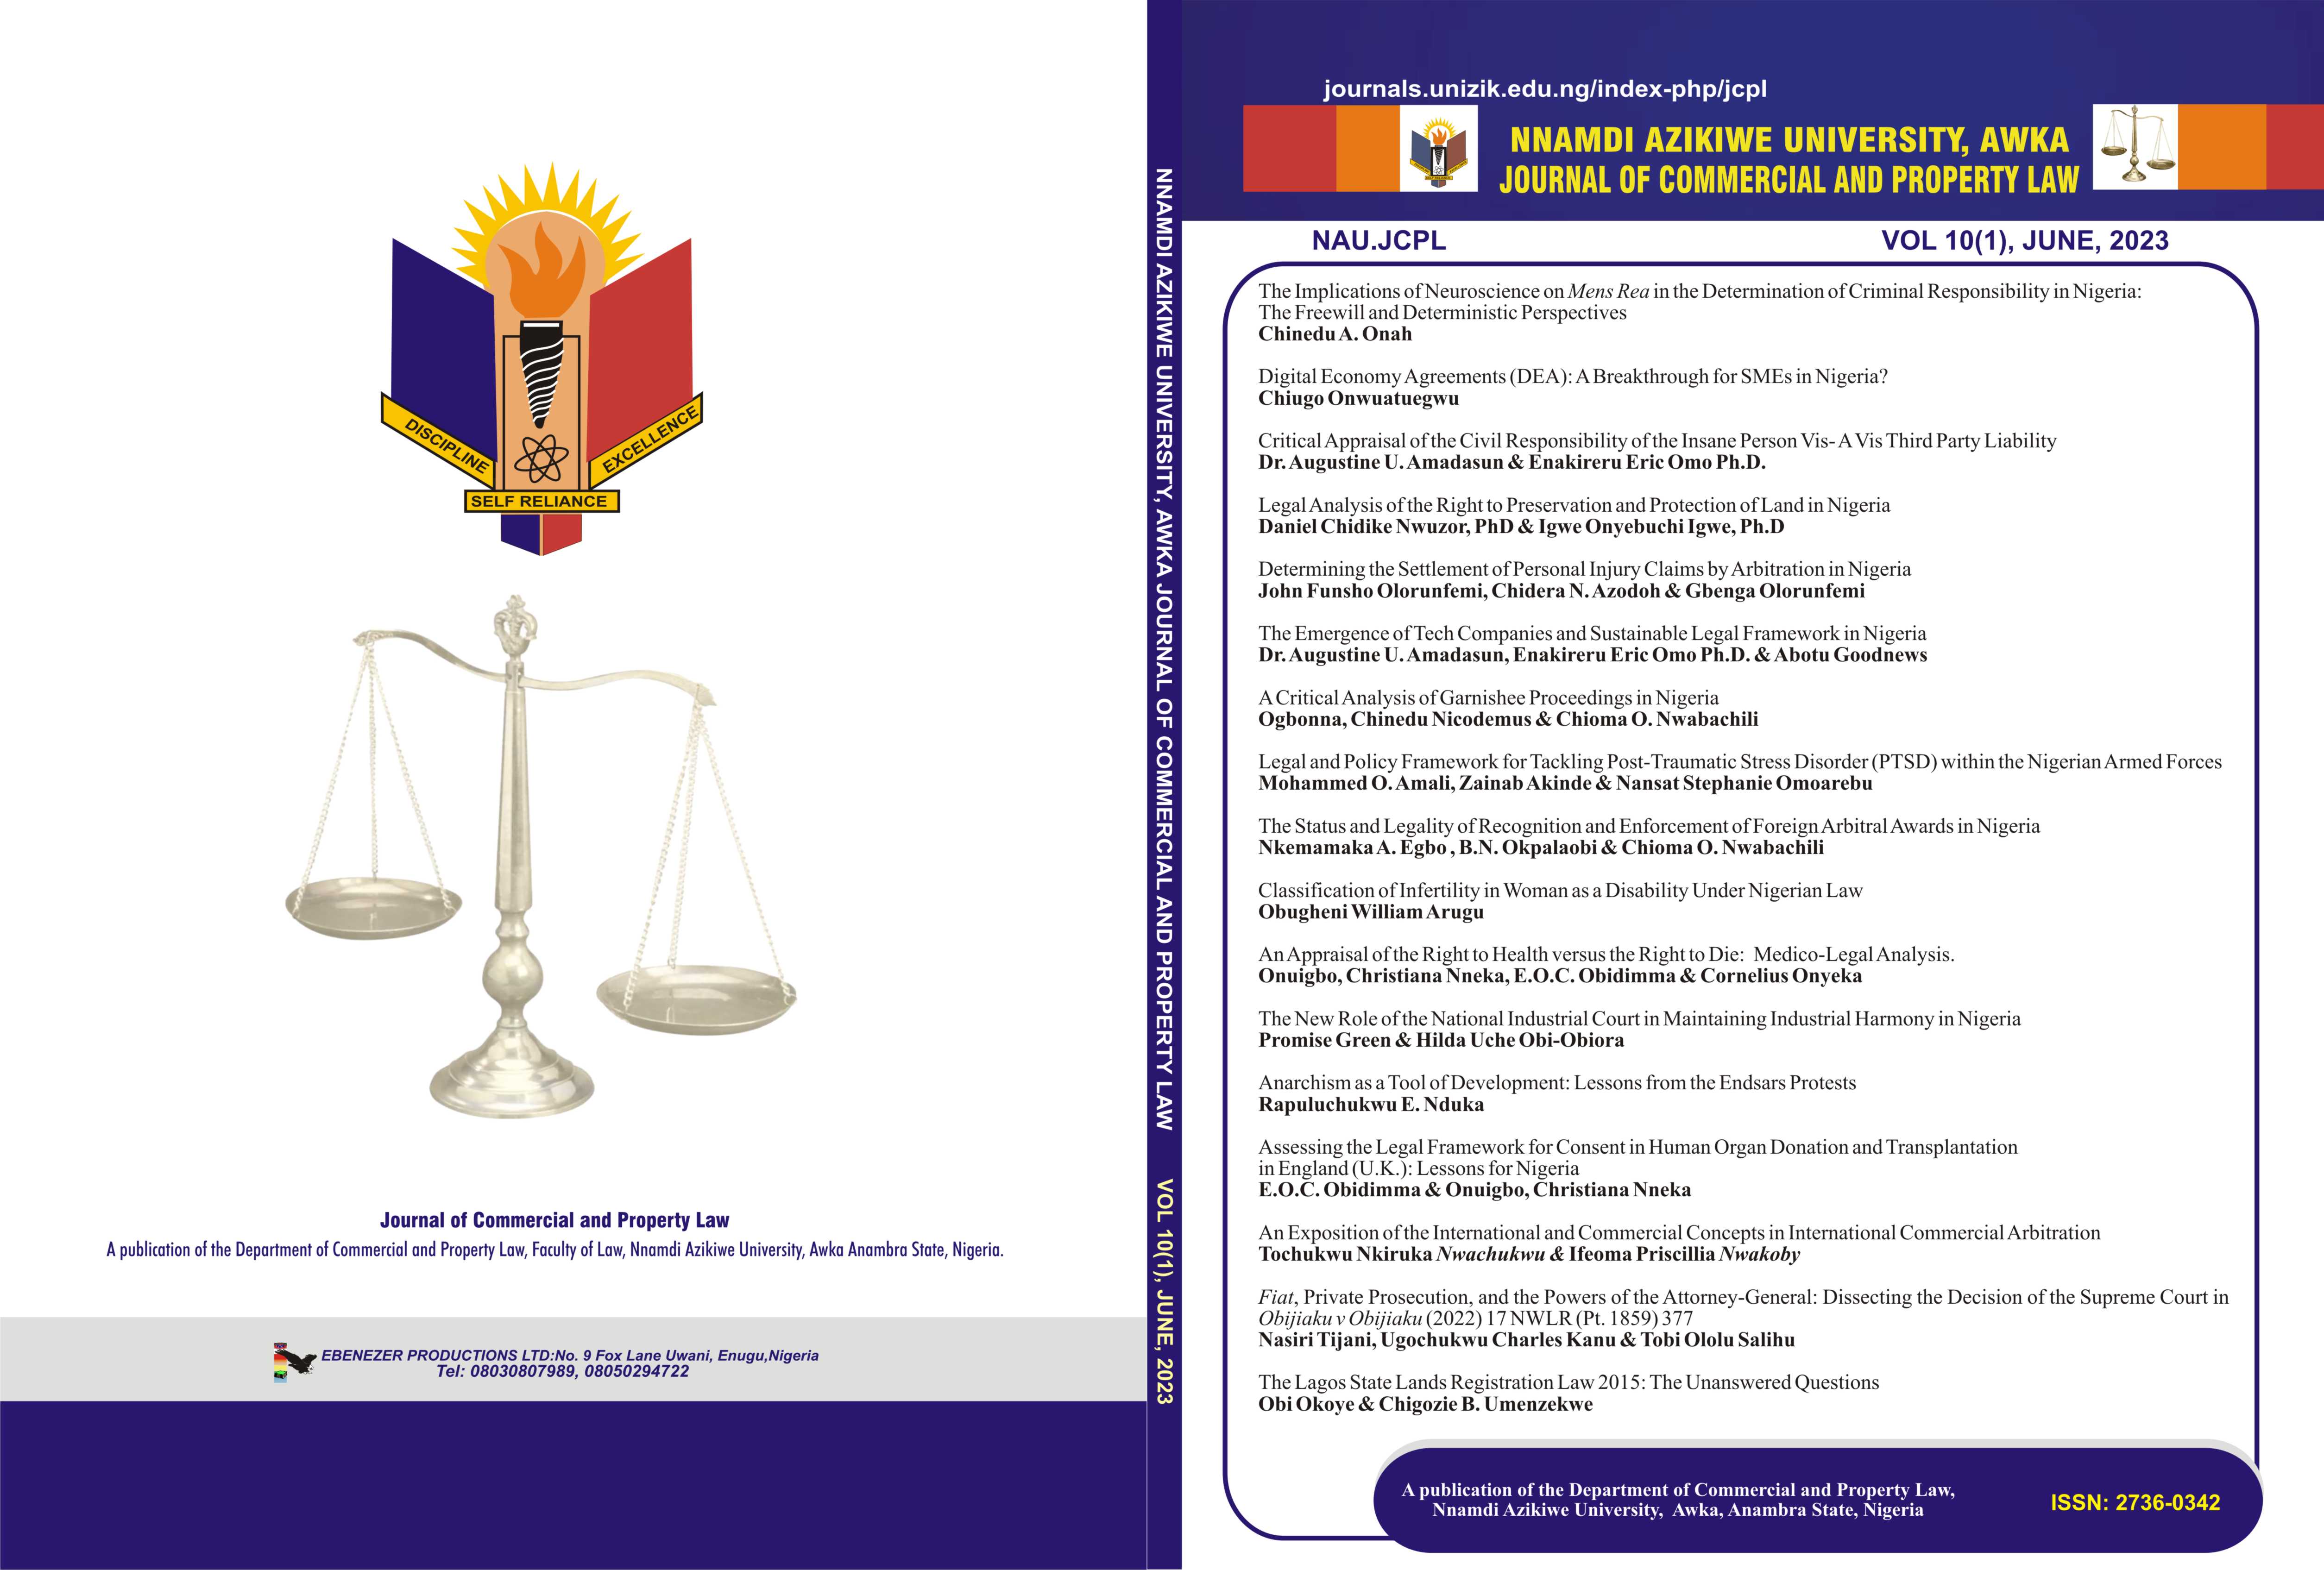 					View Vol. 10 No. 1 (2023): NNAMDI AZIKIWE UNIVERSITY JOURNAL OF COMMERCIAL AND PROPERTY LAW
				